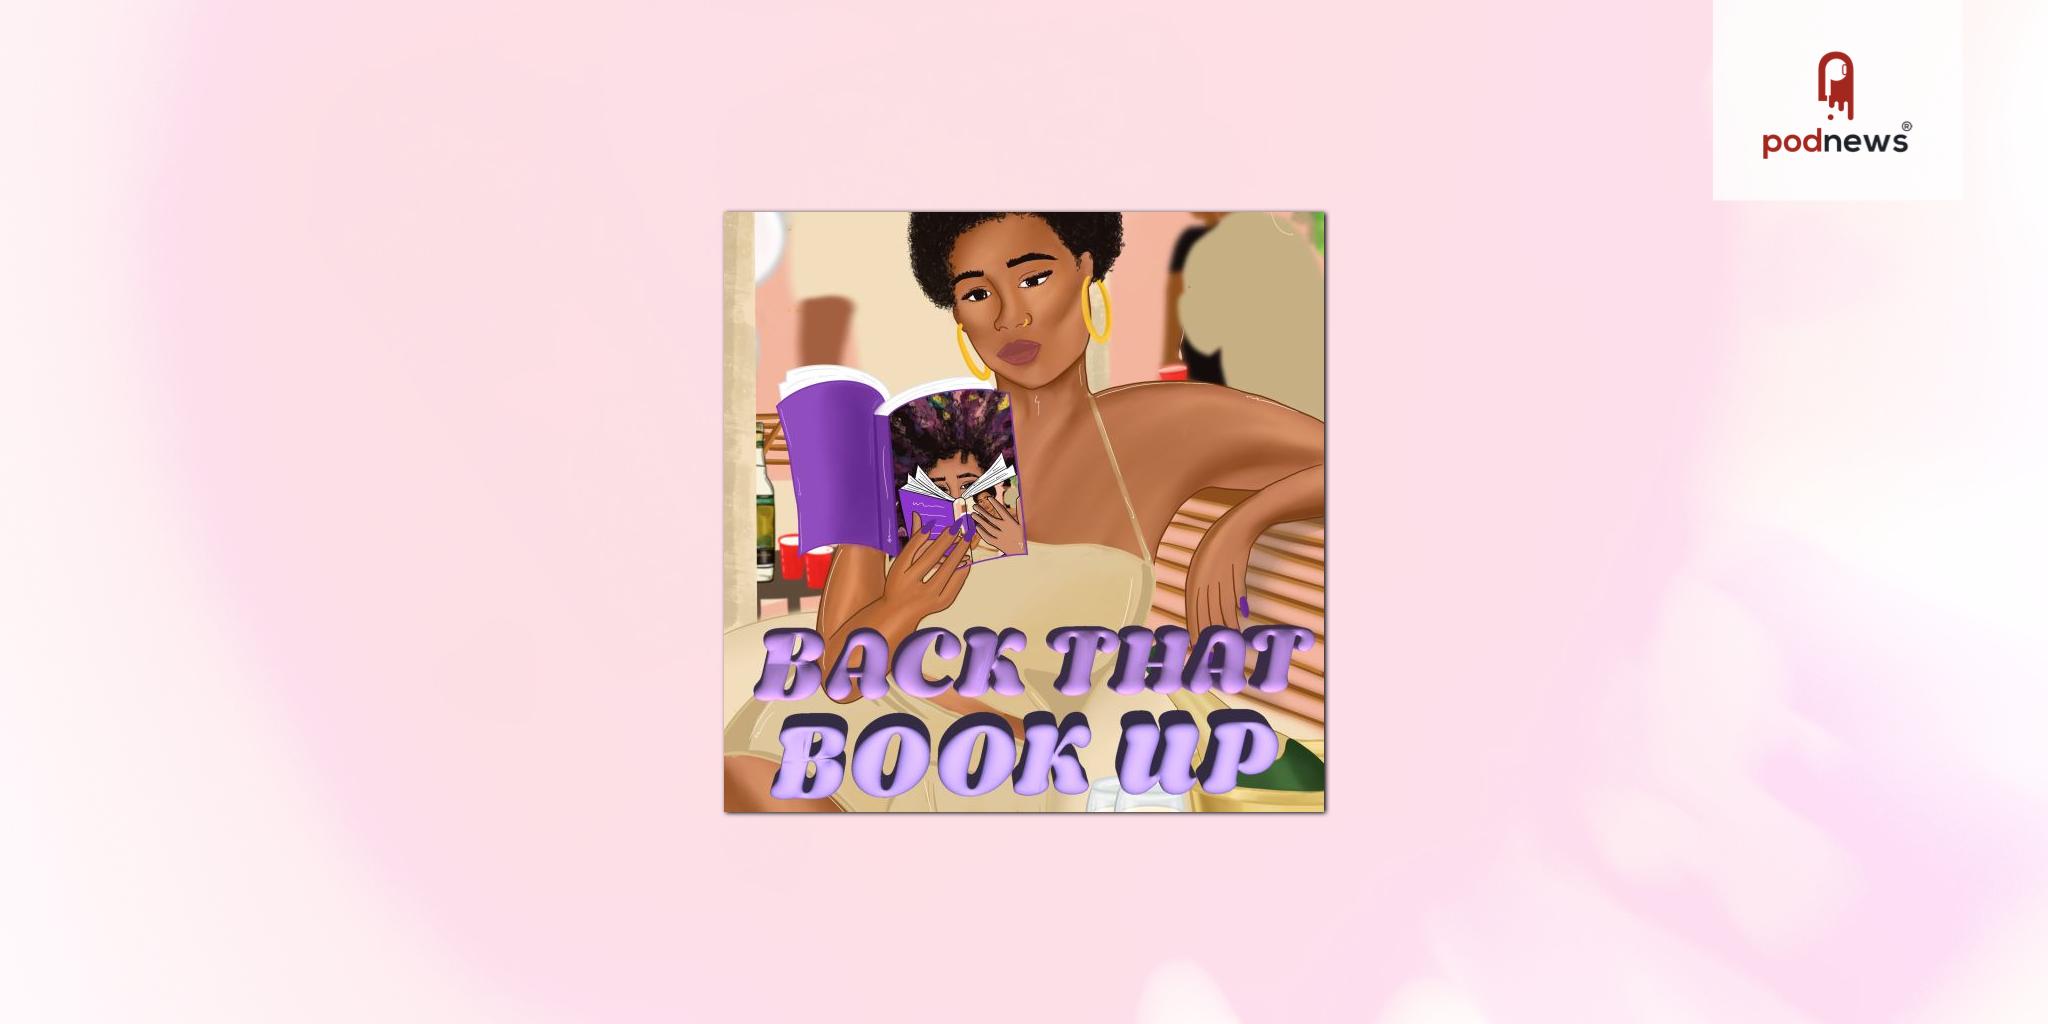 Back That Book Up launches